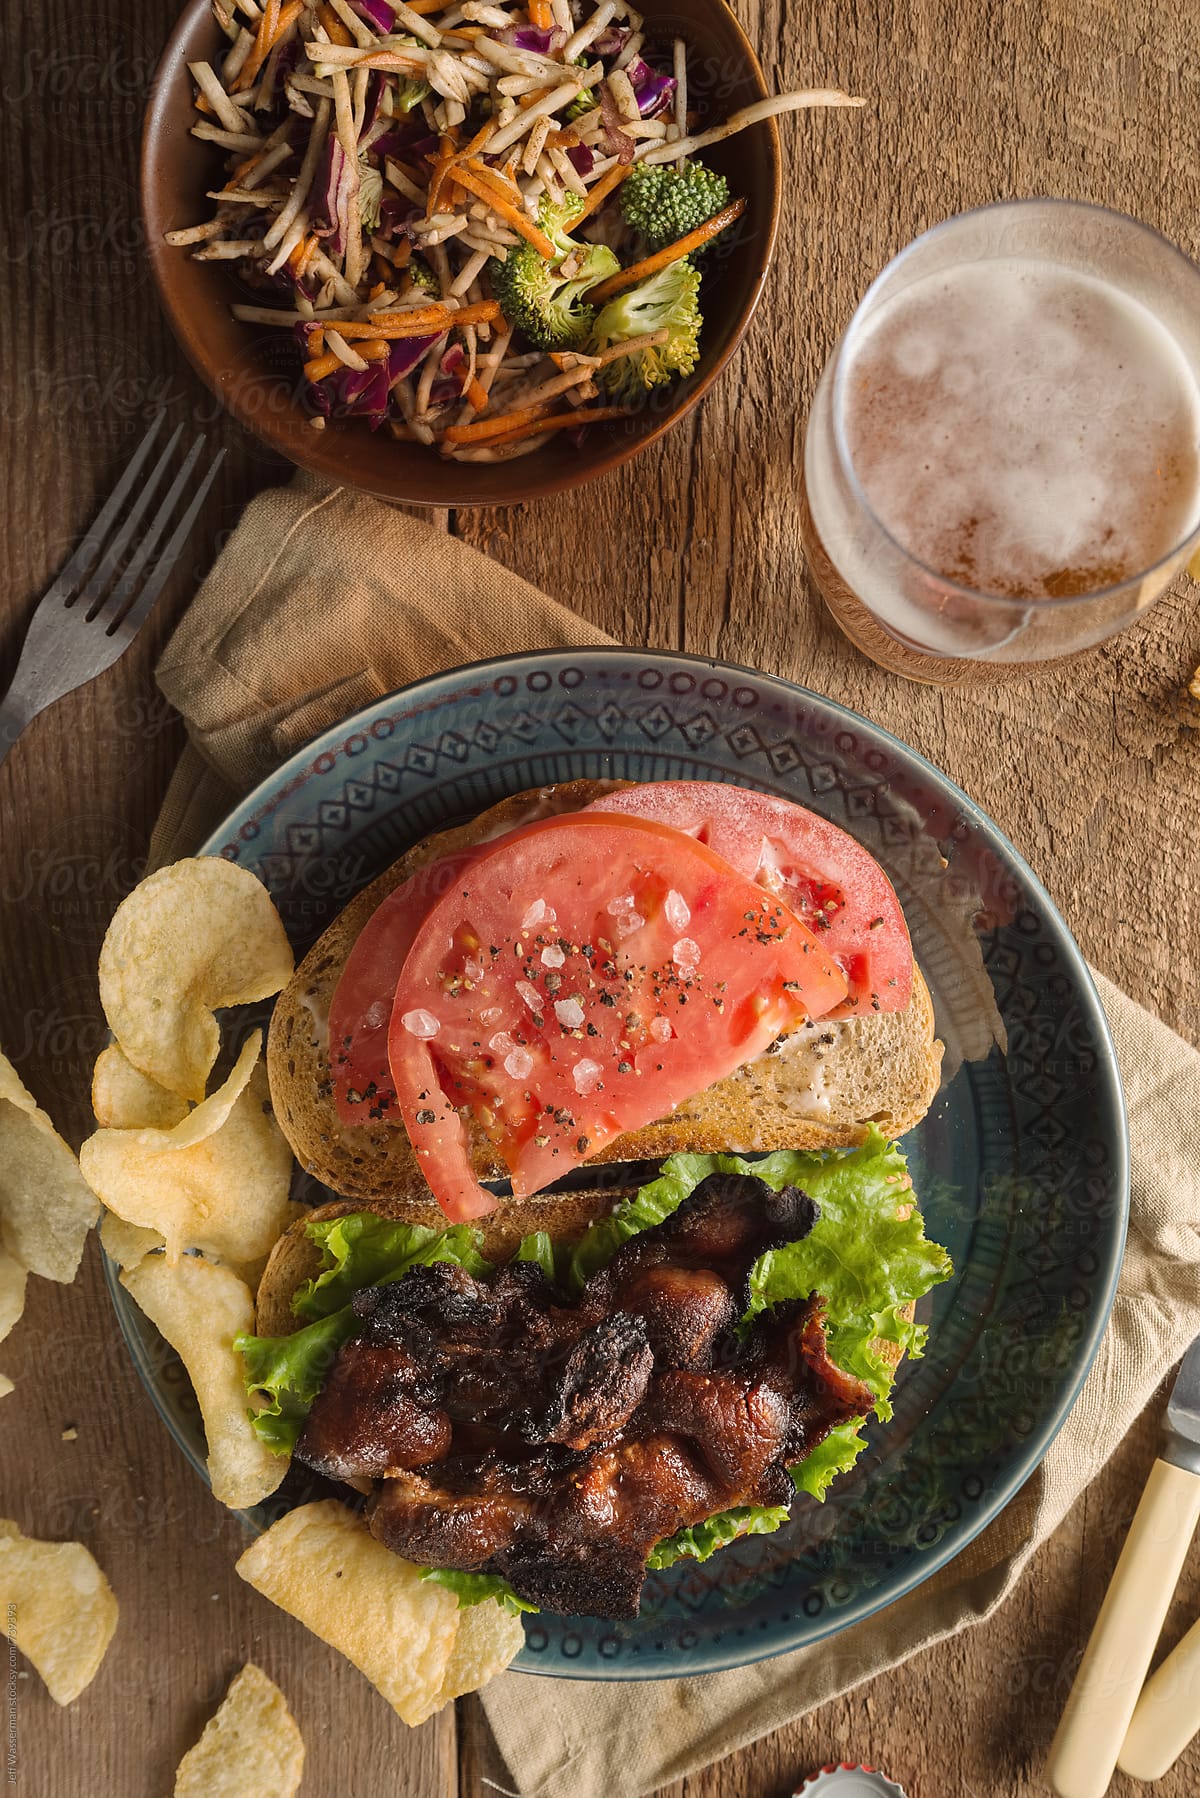 Rustic Bacon, Lettuce and Tomato Sandwich From Above